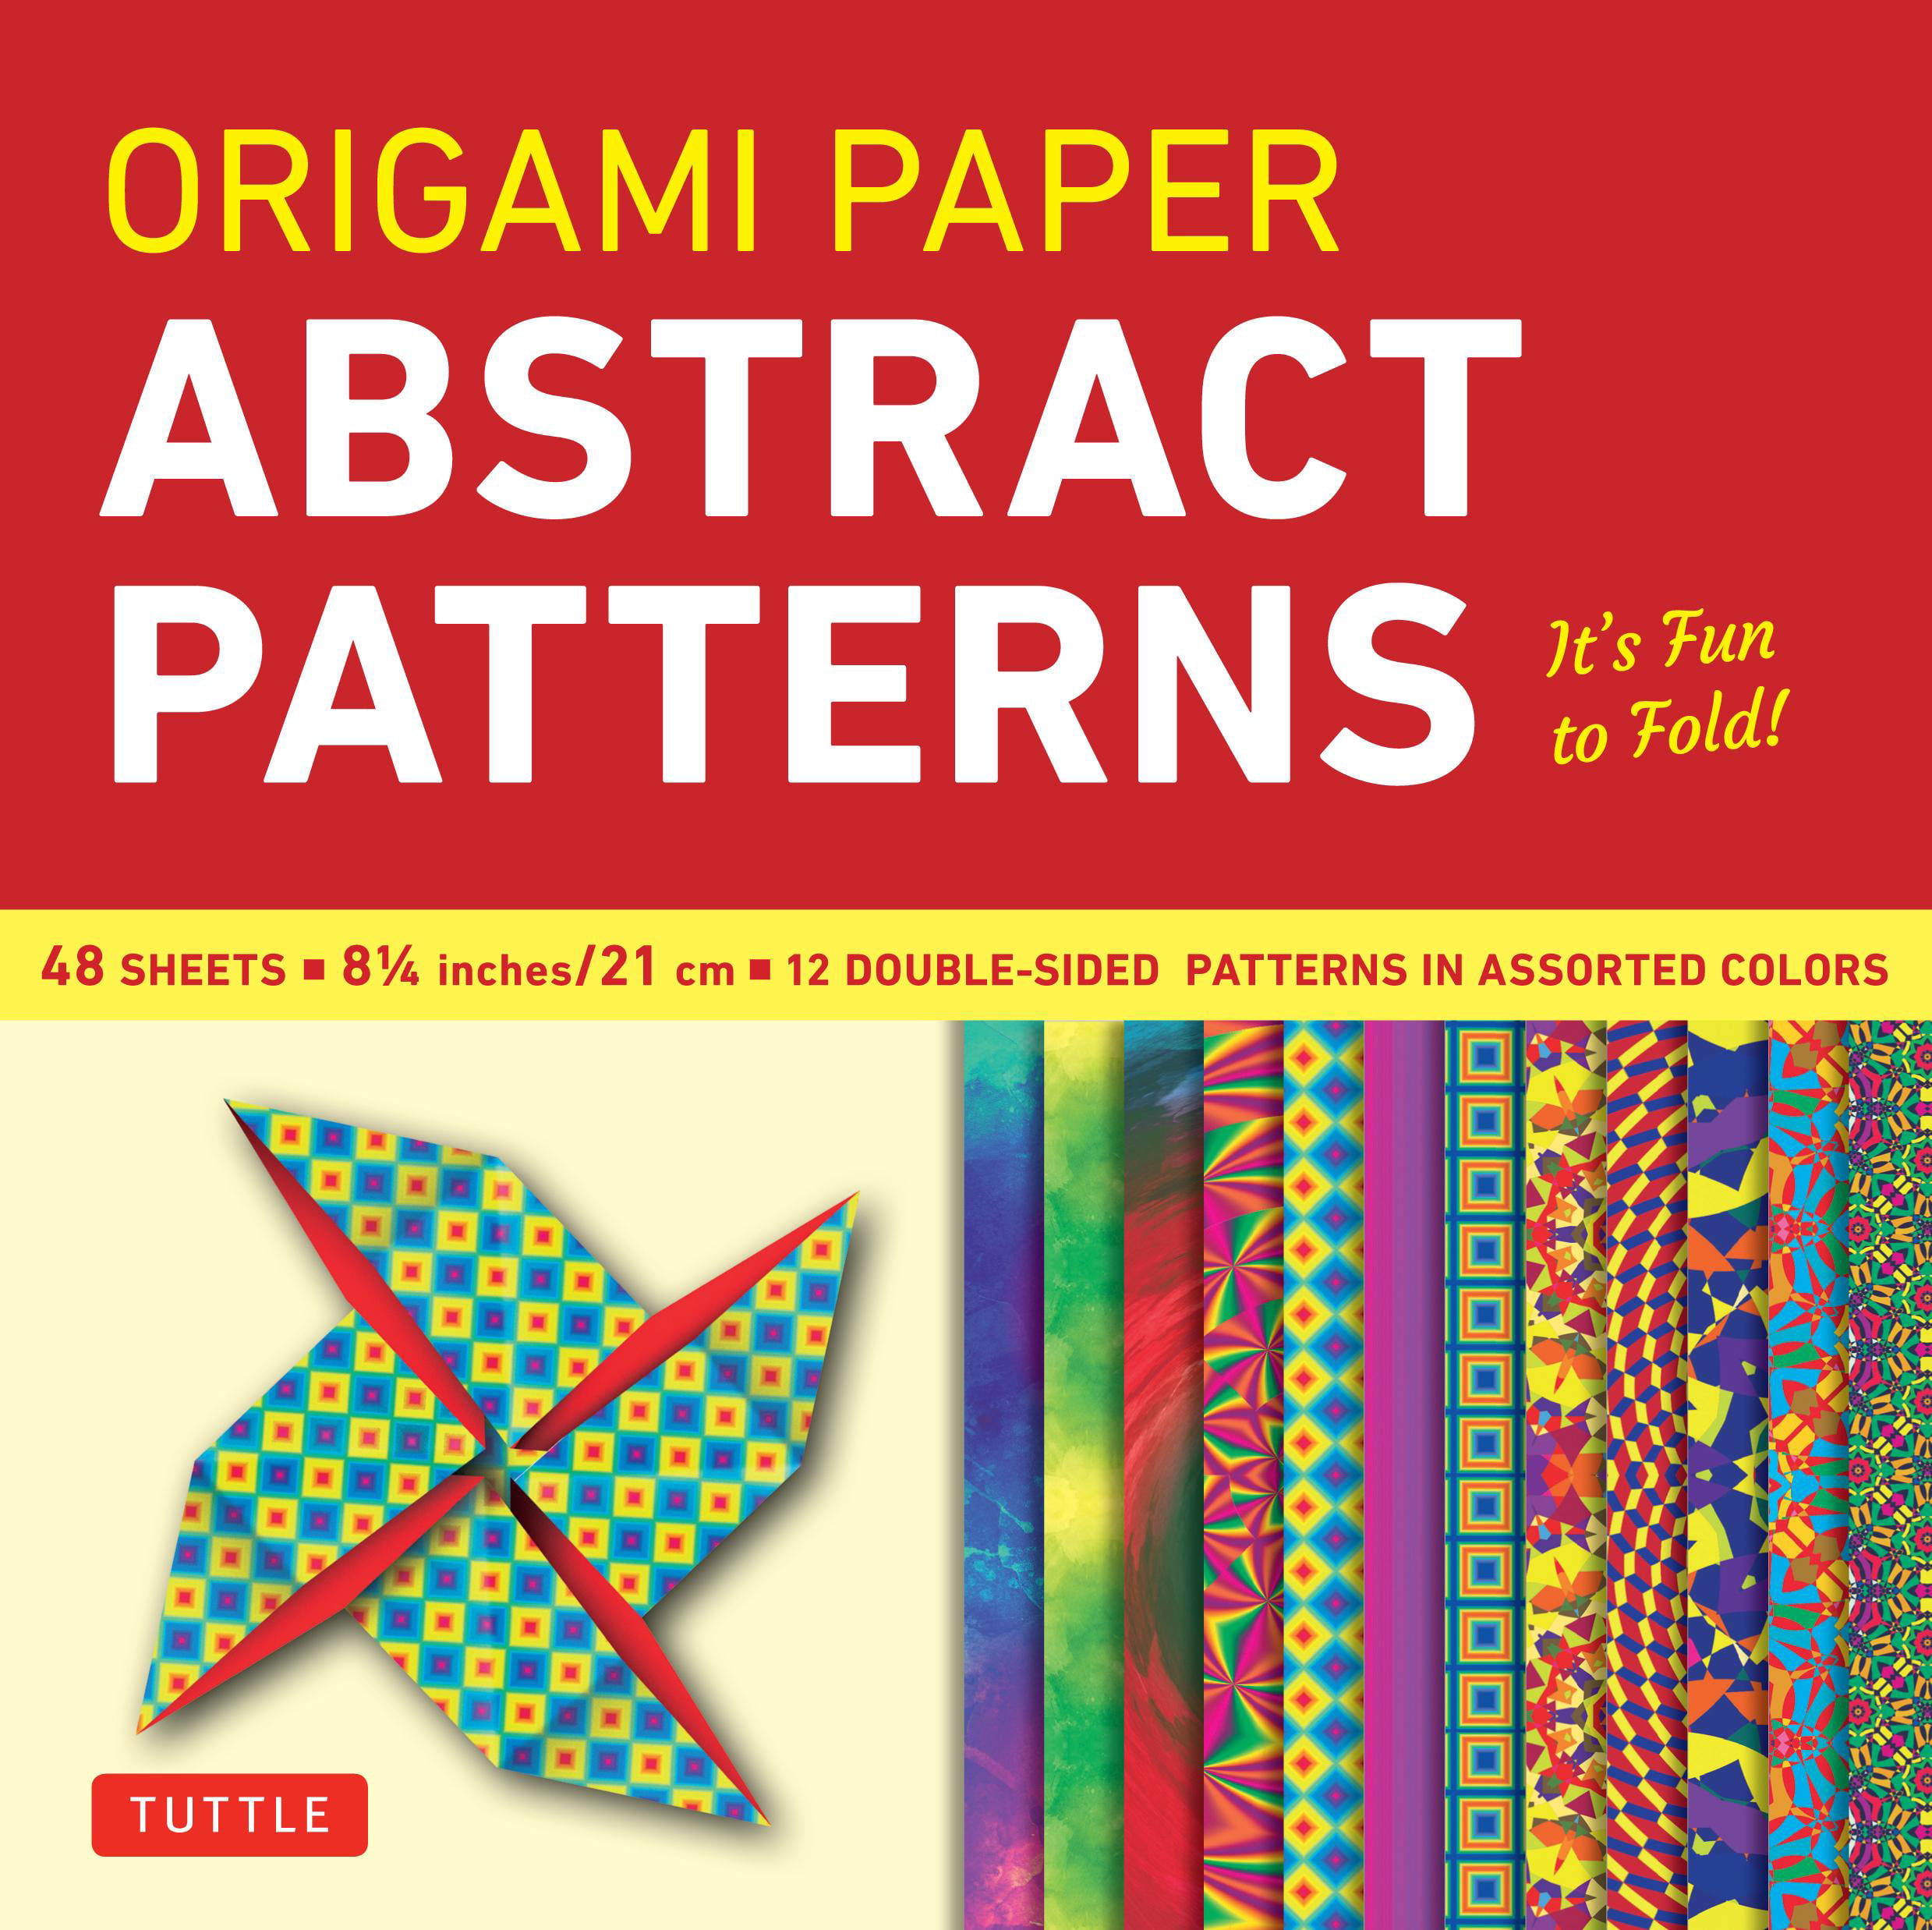 Origami Paper Abstract Patterns 8 1/4" 48 Sheets Tuttle Origami